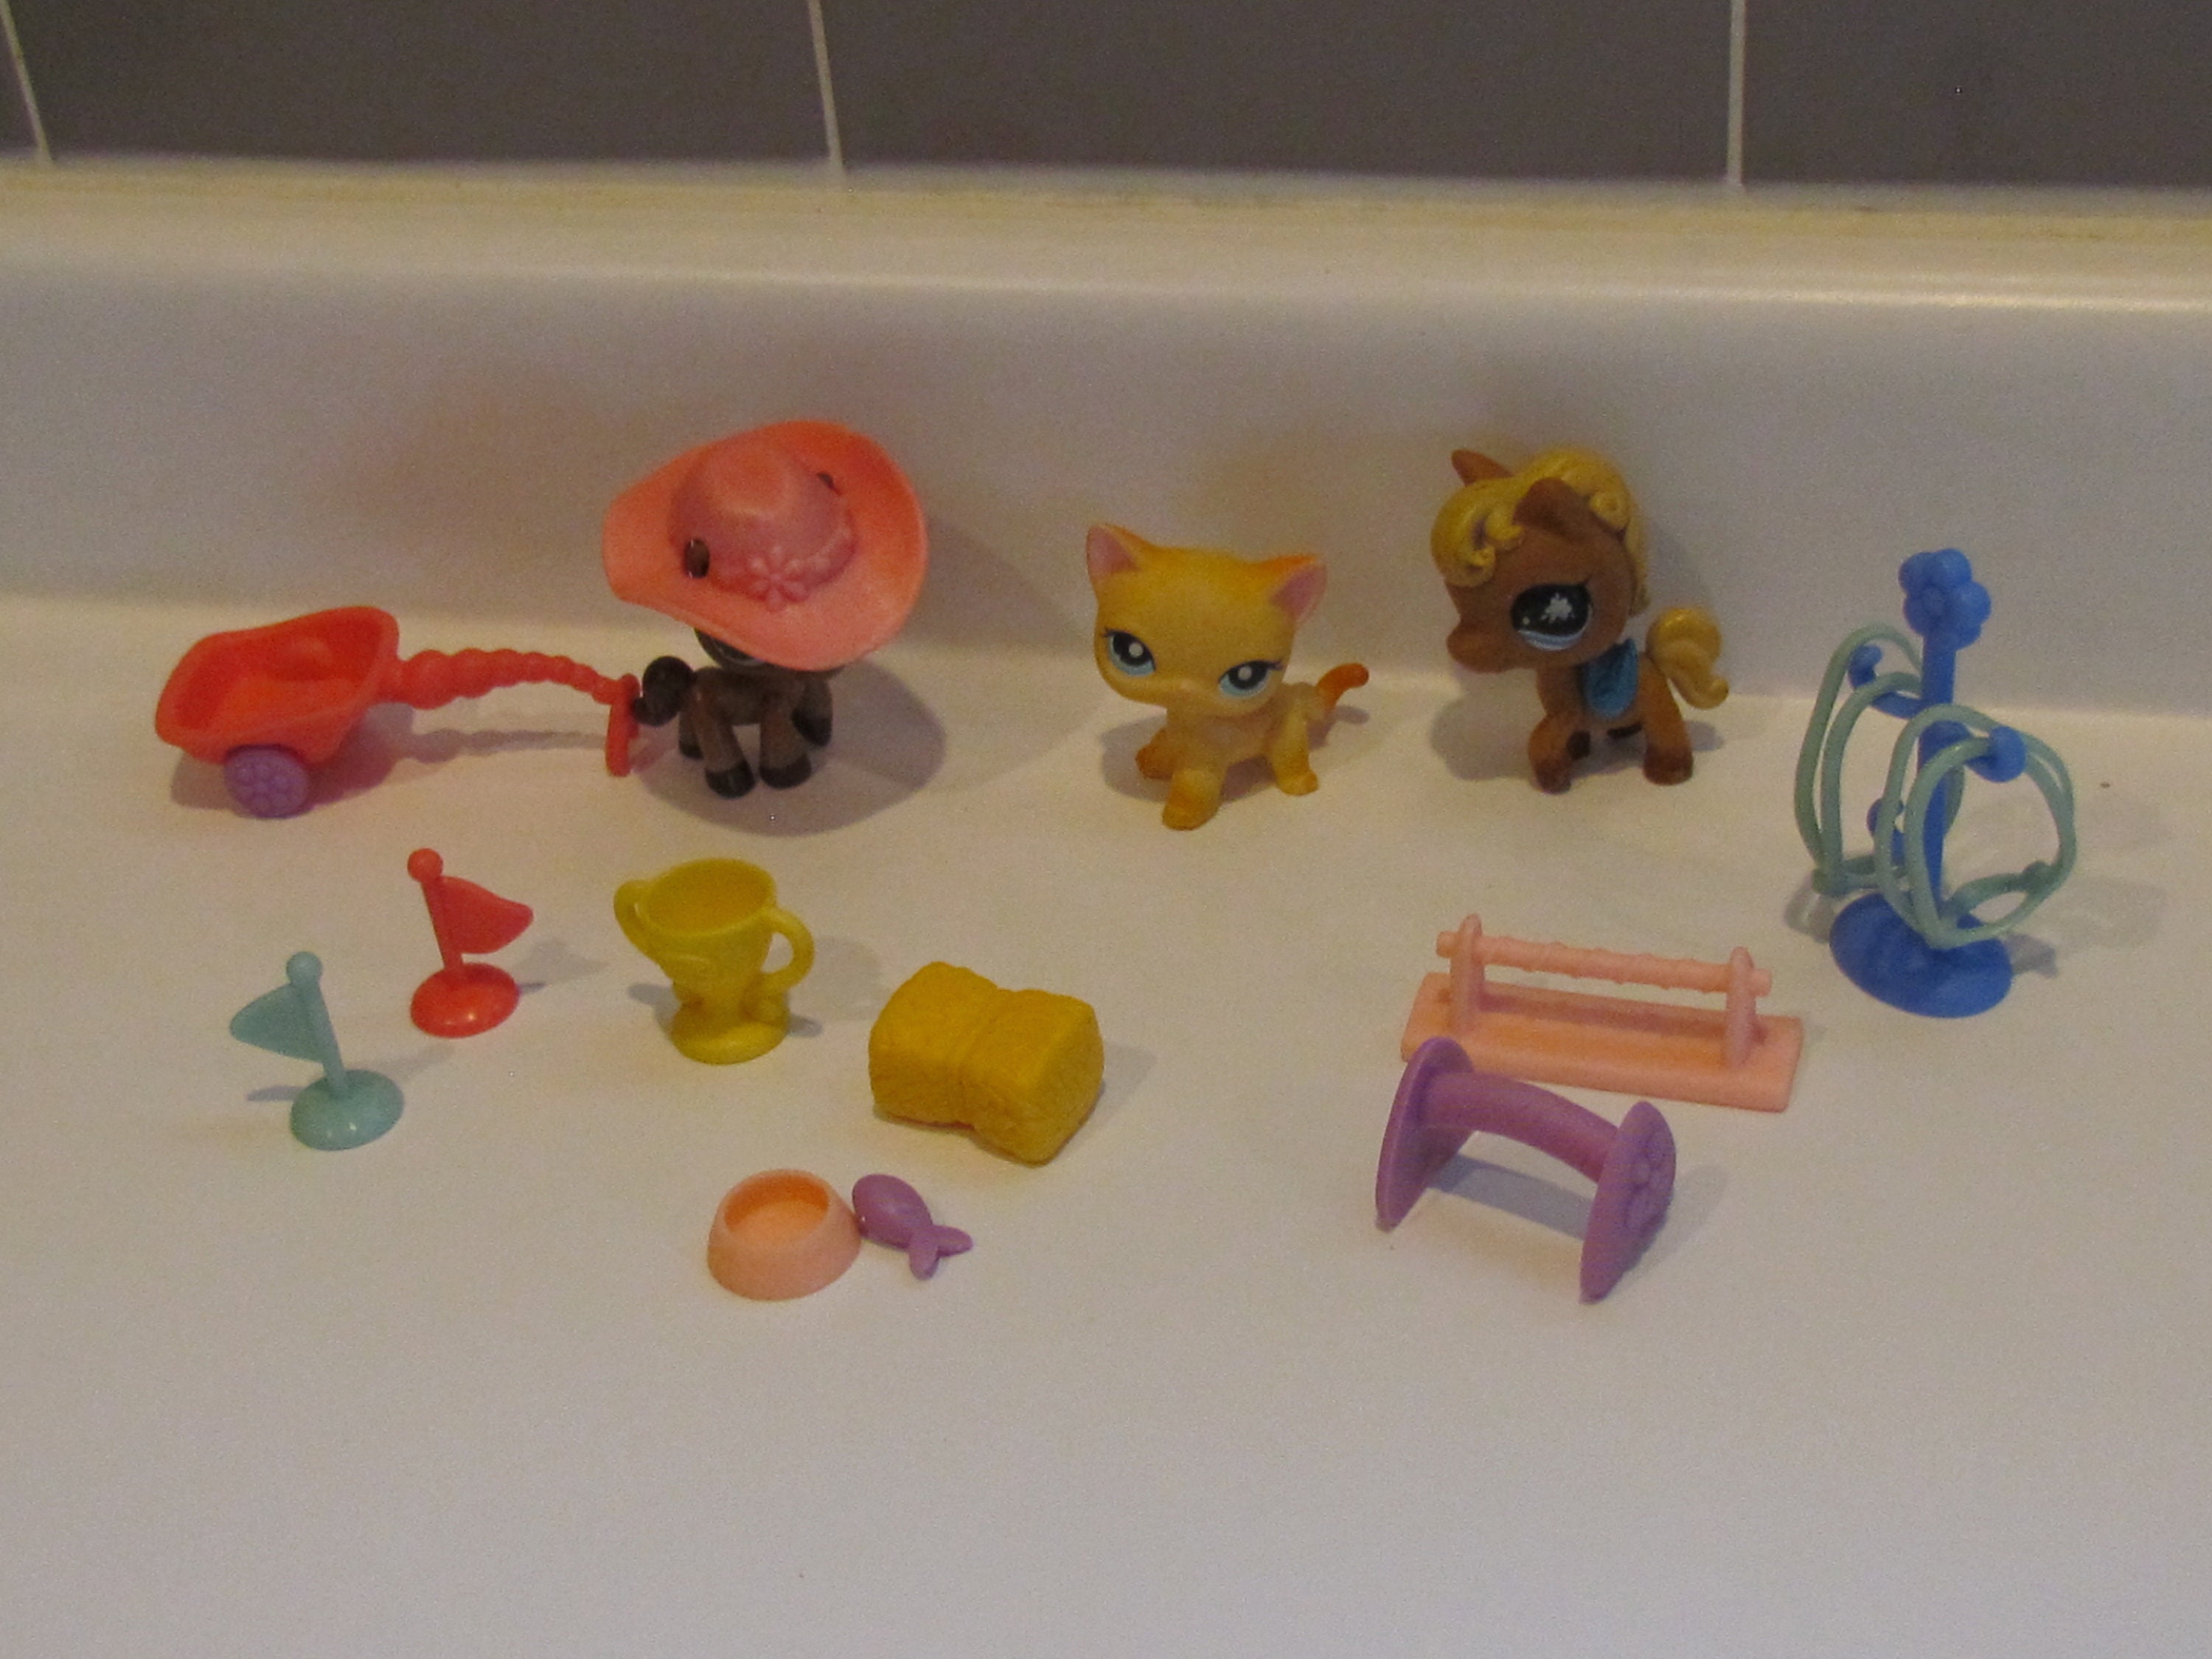 Littlest Pet Shop Magic Motion Tree House Playset Hasbro LPS Toy Walking  Pets Wind Up 